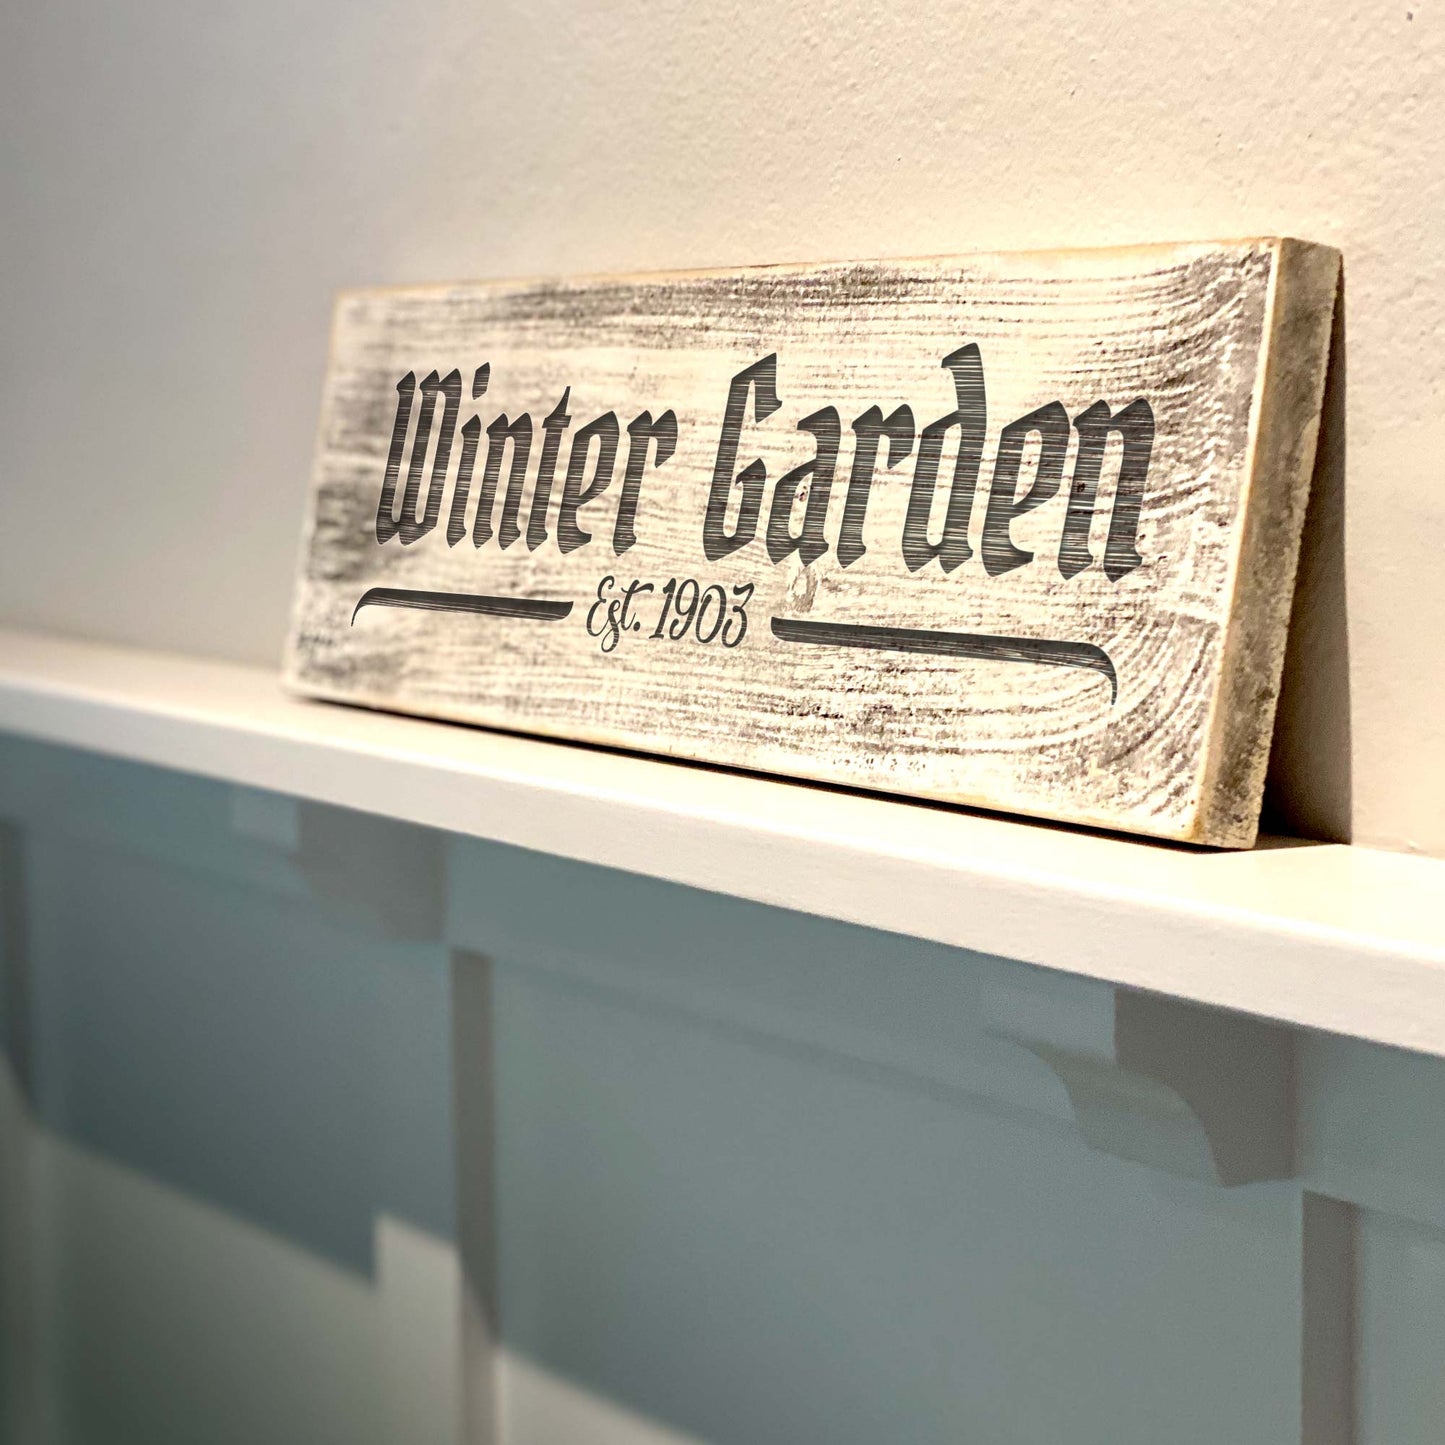 Winter Garden EST.1903 - Handcrafted Artisan Wood signs - A. B. Newton and Company